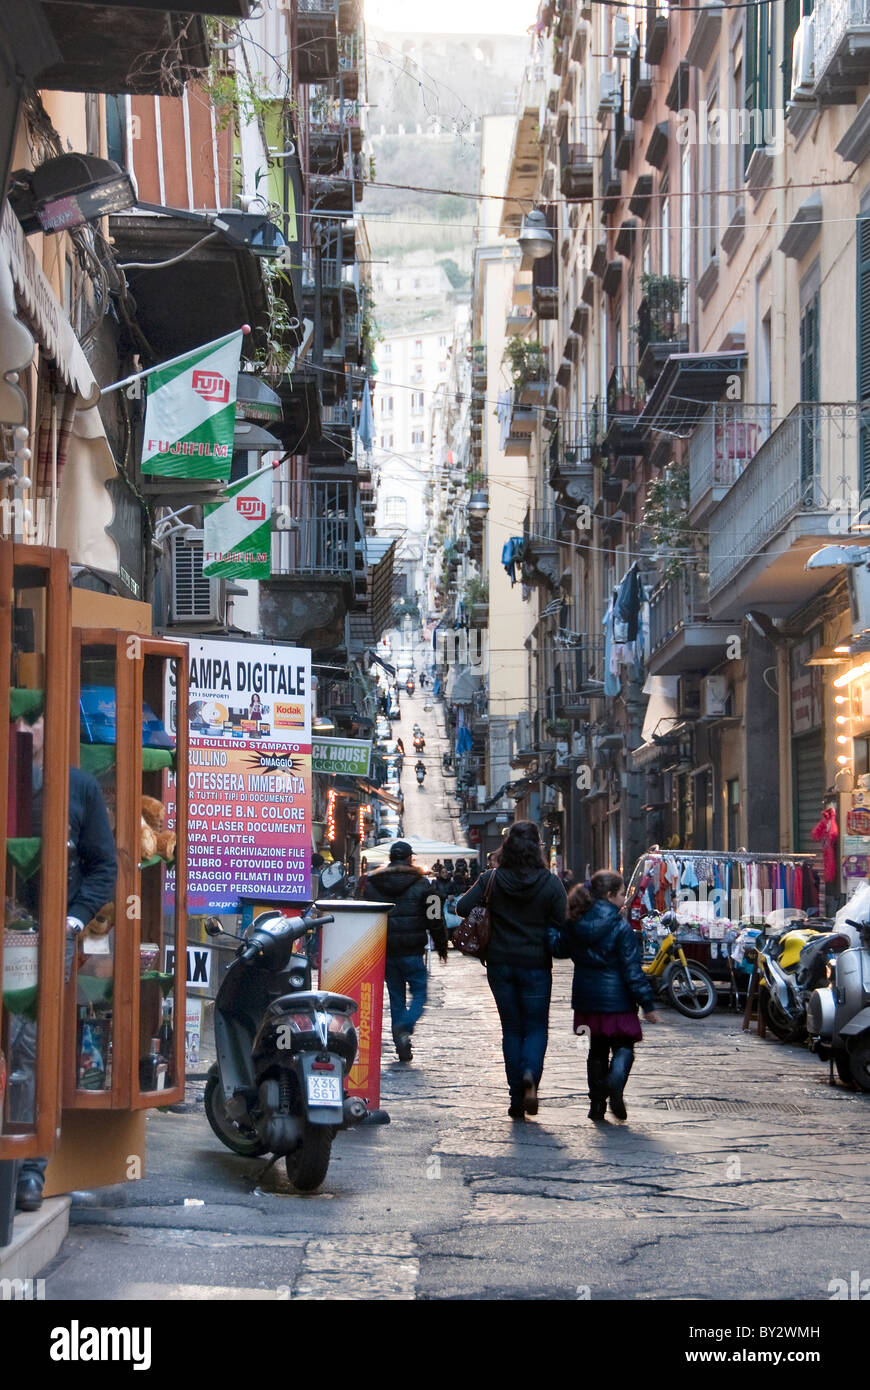 Quartieri Spagnoli (Spanish Quarters) is a part of the city of Naples in Italy. Stock Photo